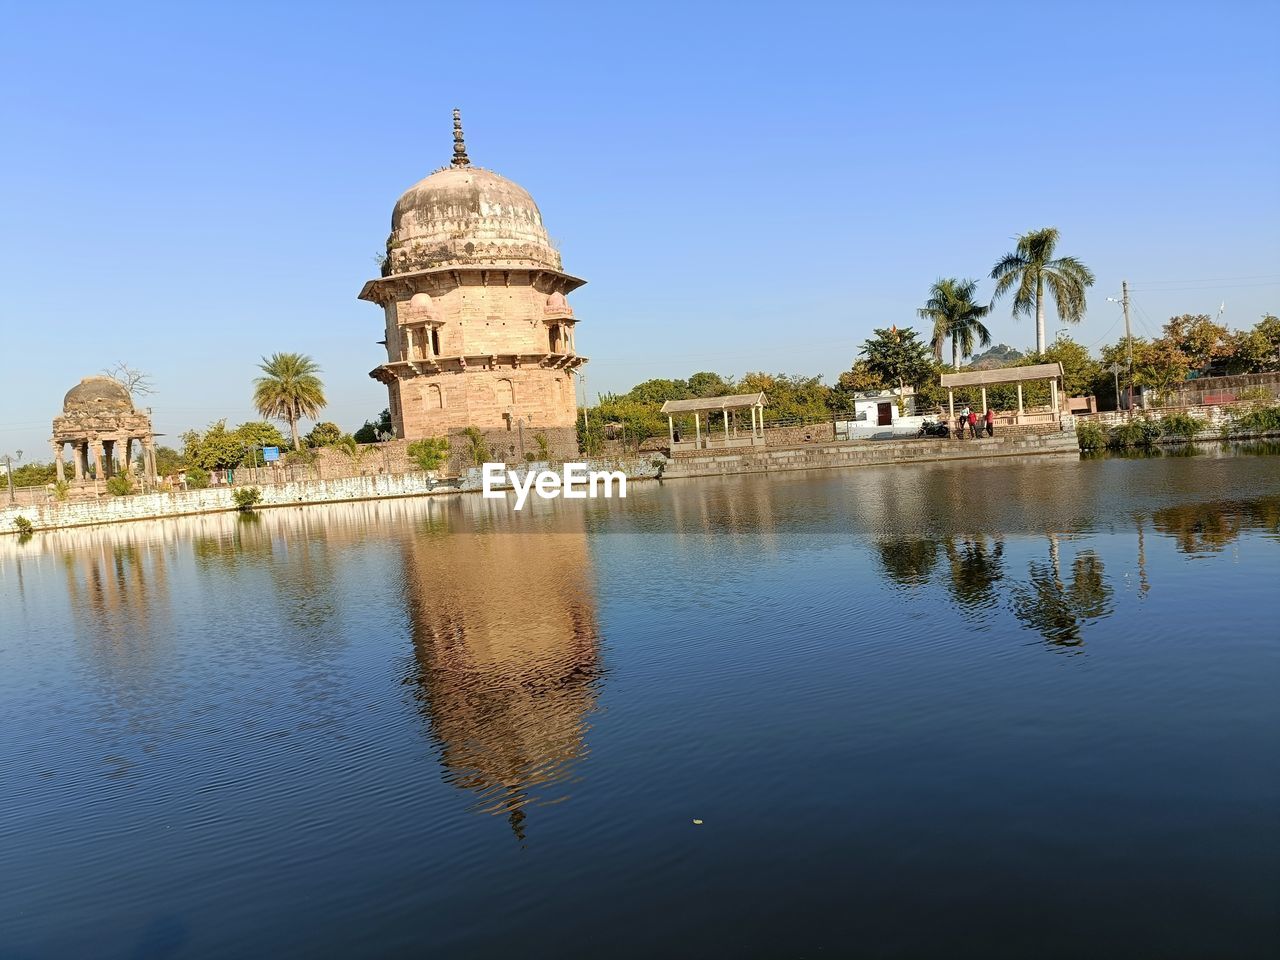 architecture, water, reflection, built structure, travel destinations, building exterior, sky, travel, nature, dome, religion, history, tourism, clear sky, tree, the past, blue, building, plant, place of worship, belief, no people, lake, landmark, city, outdoors, spirituality, day, sunny, ancient, temple - building, palm tree